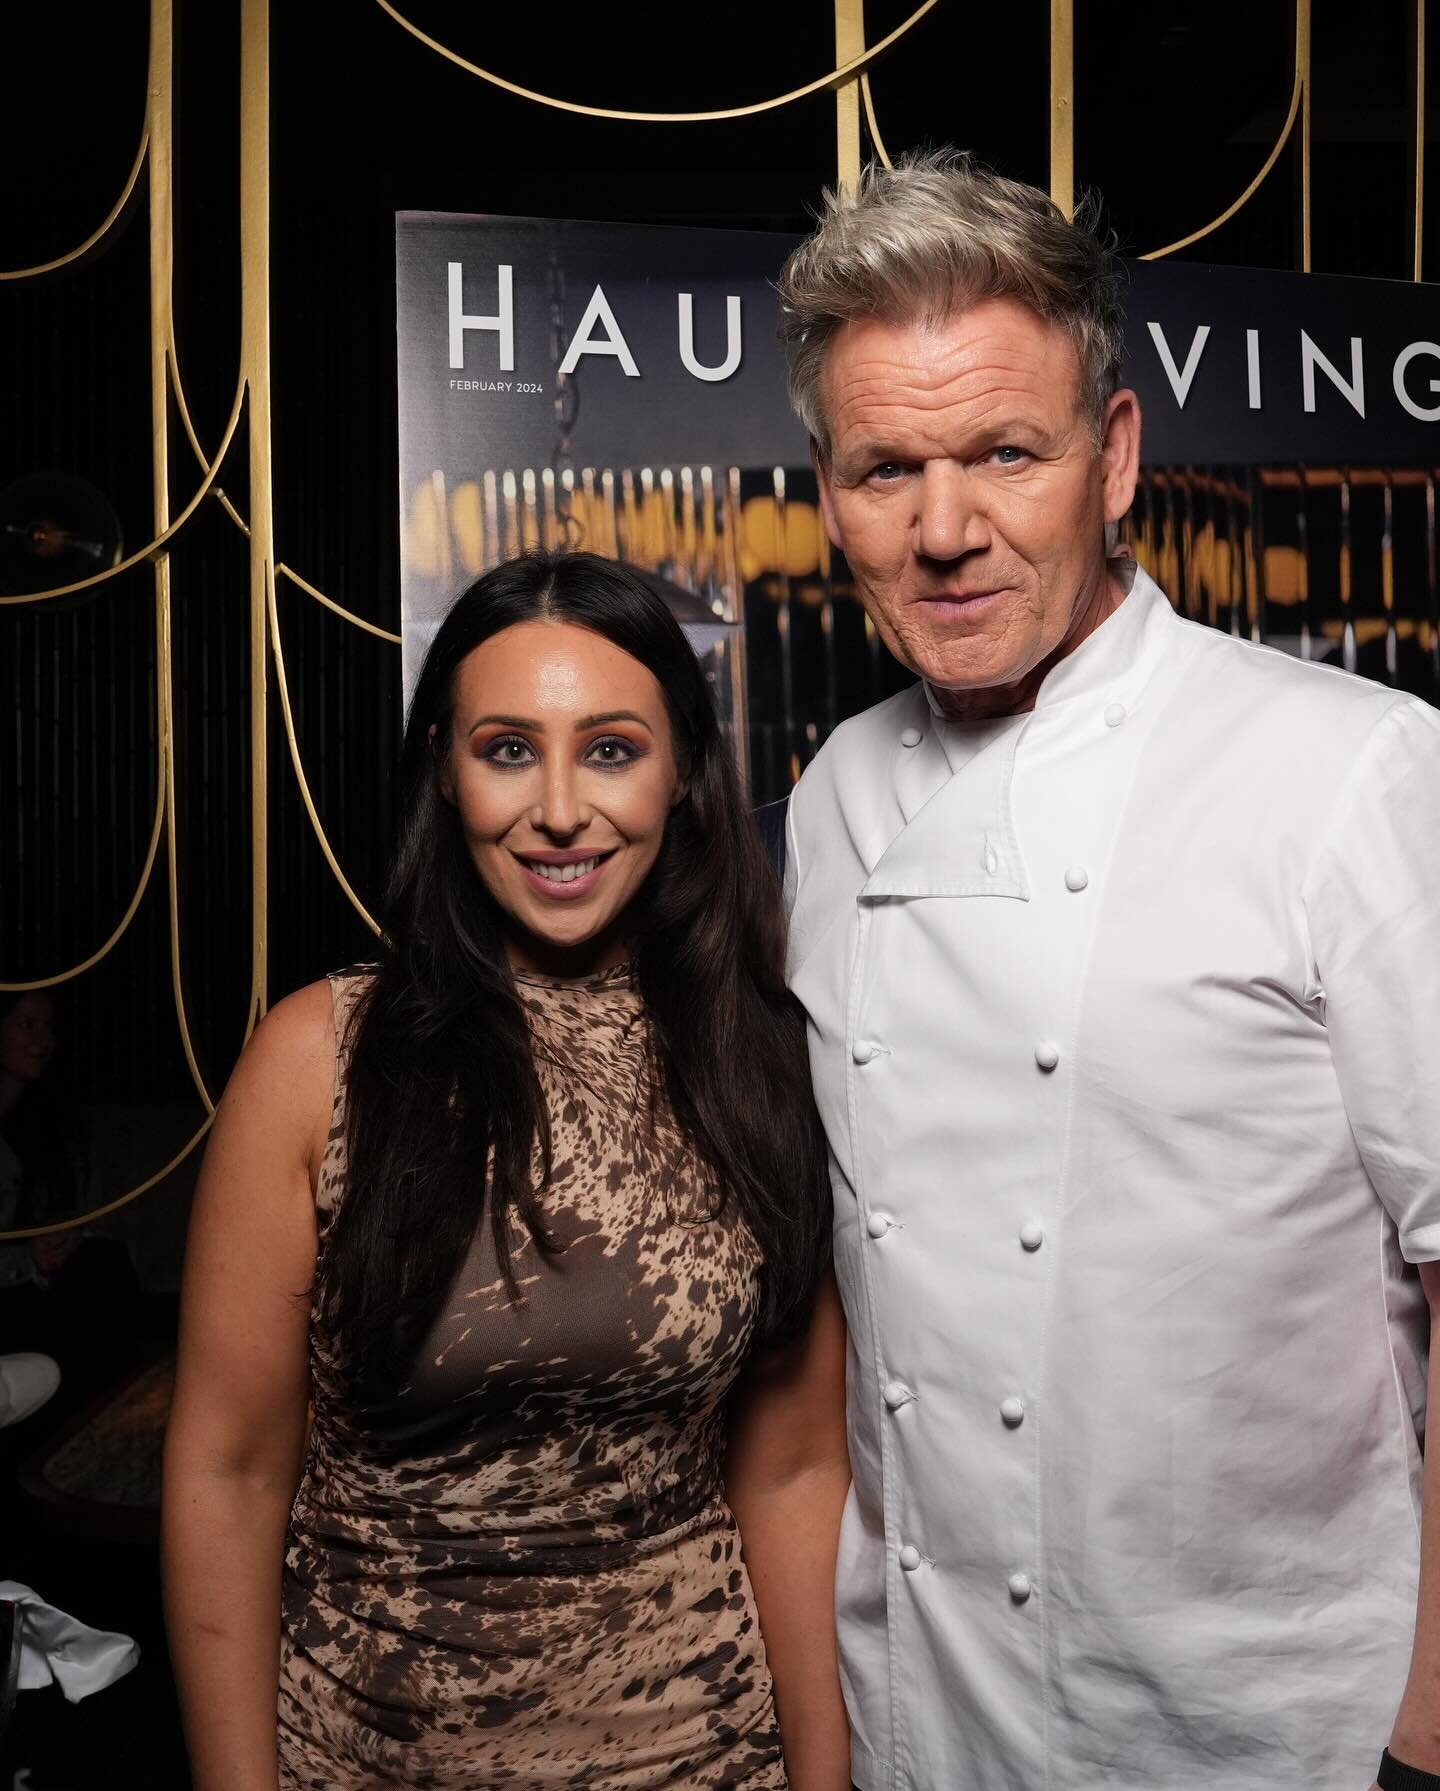 Just another Thursday in Miami with @hauteliving at @luckycatbygordonramsay presenting @gordongram with a painting called &ldquo;The Chef is on Fire&rdquo;🔥 by @thejohnathanschultz - made with yellow &amp; rose gold Leaf. 

Never a dull day at @priv